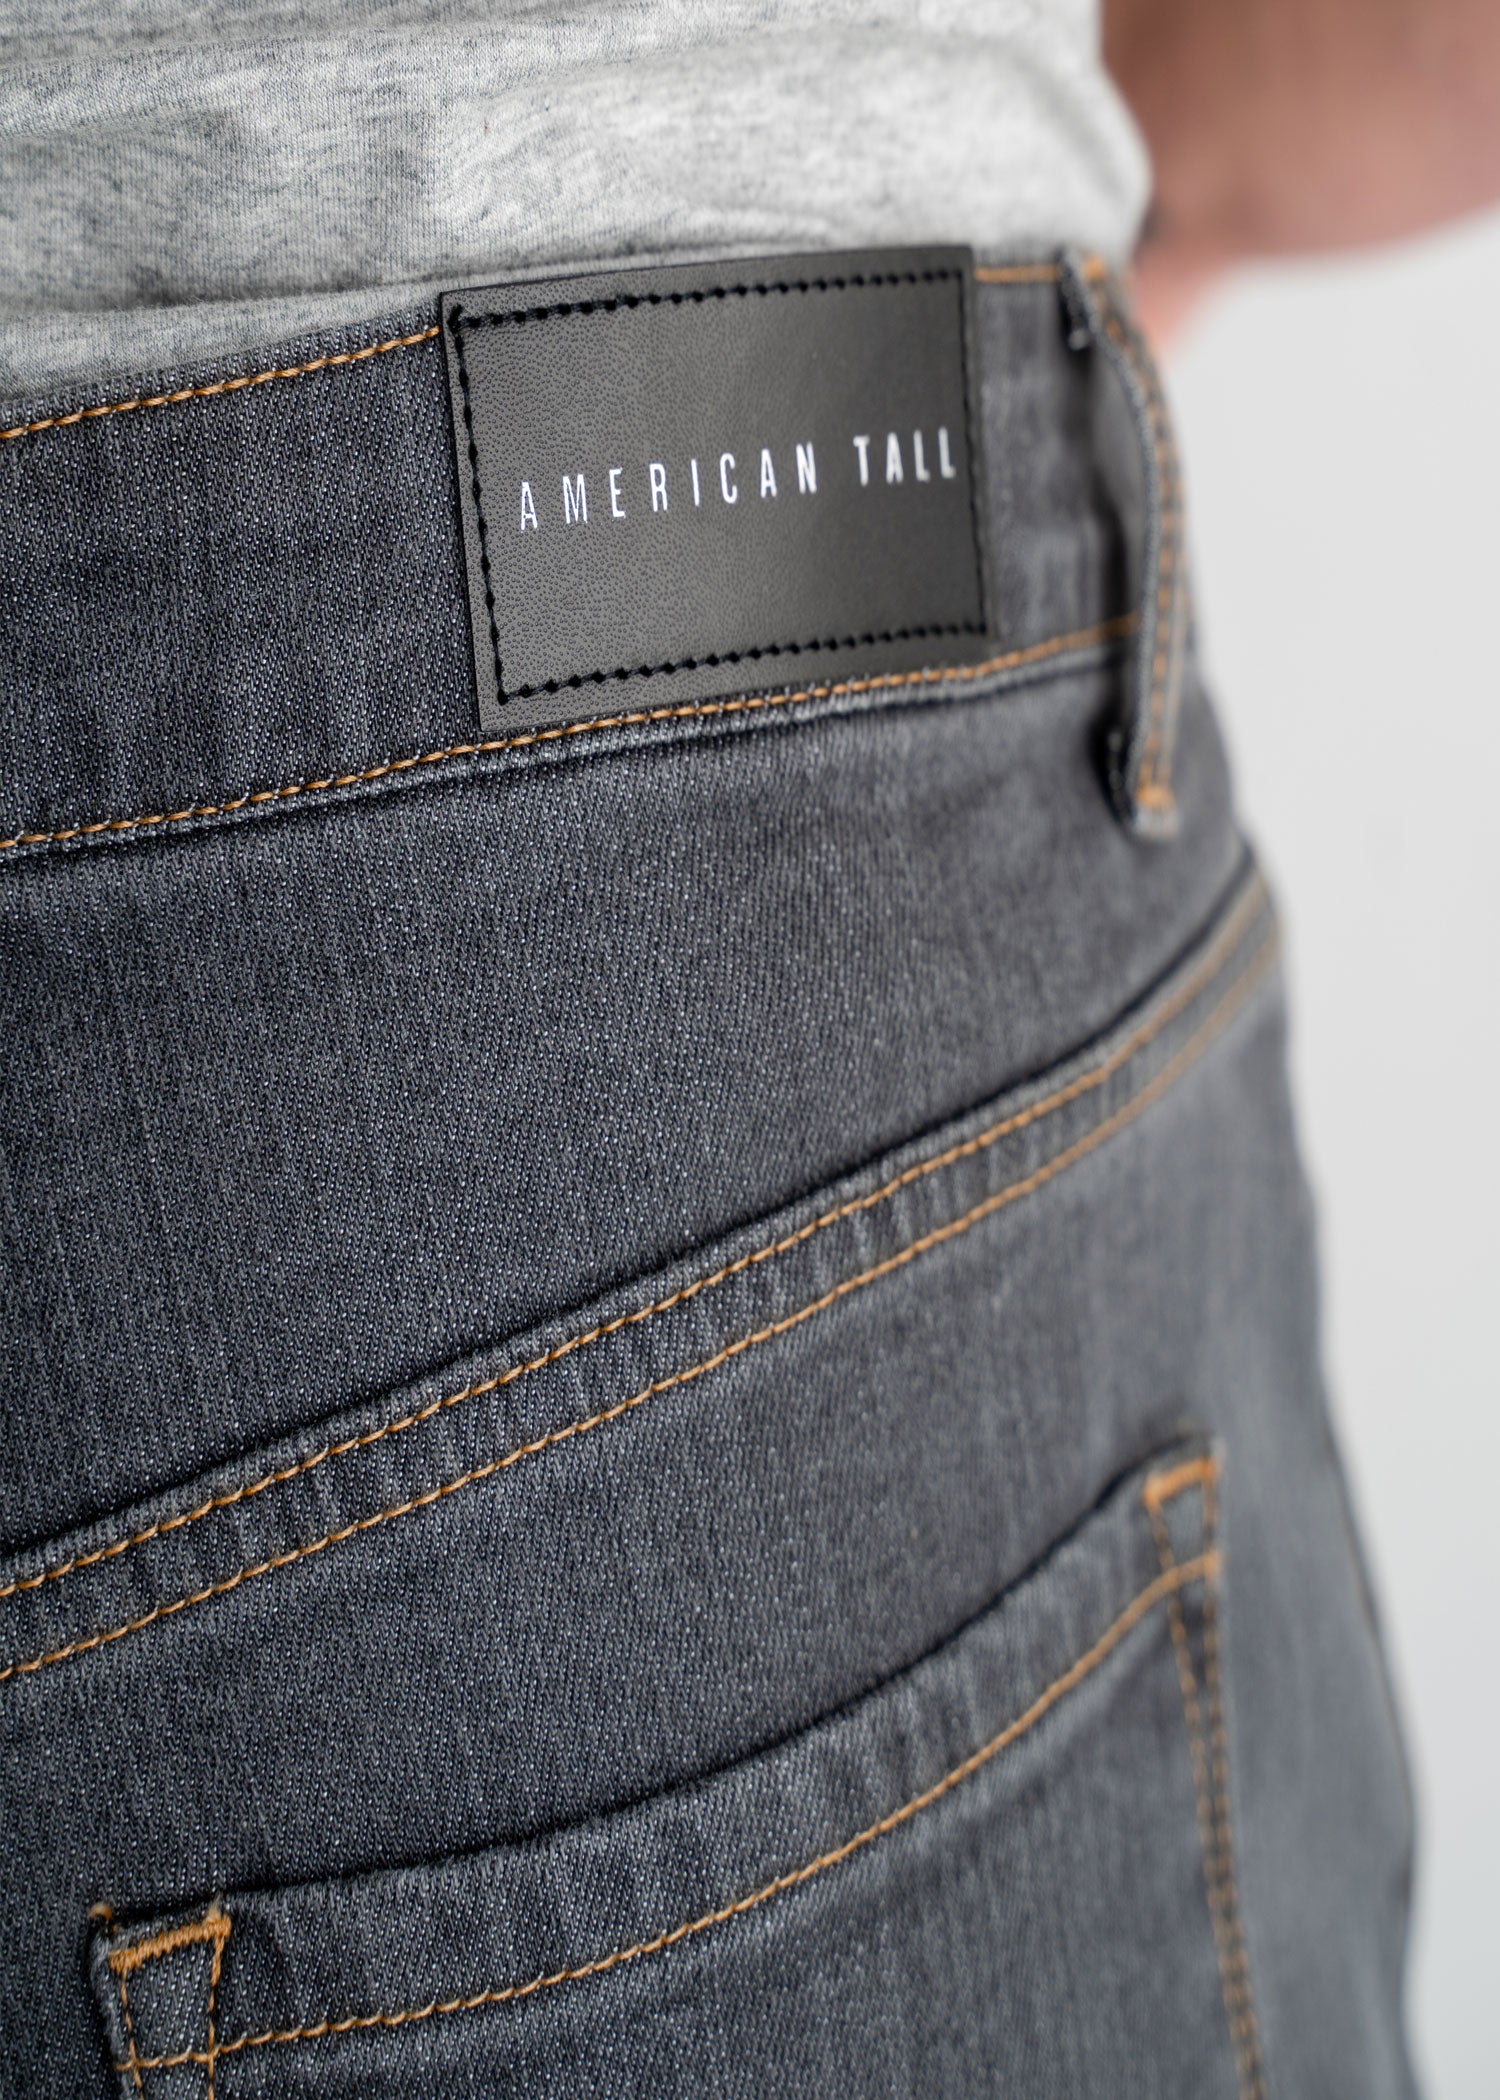 american-tall-mens-carman-jeans-grey-patch